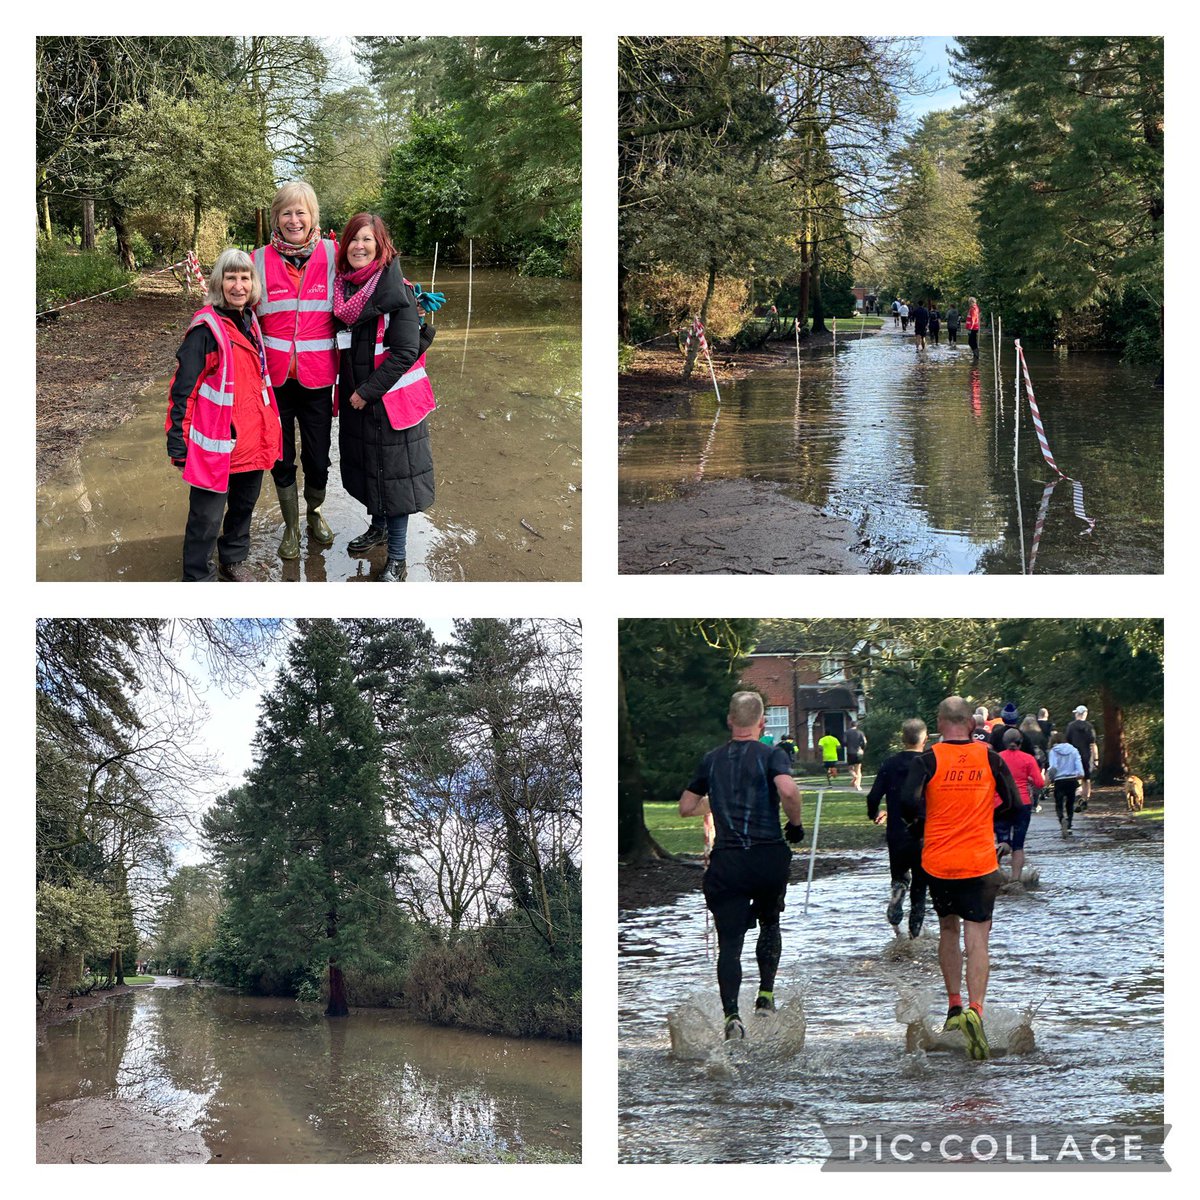 Still no running for me 😢 so got to Marshall at @bedfordparkrun at the “water feature” lovely to see @LeighAKendall @suecollins2 @G_Stephens80 @jennyjwilson3 #nhs1000miles